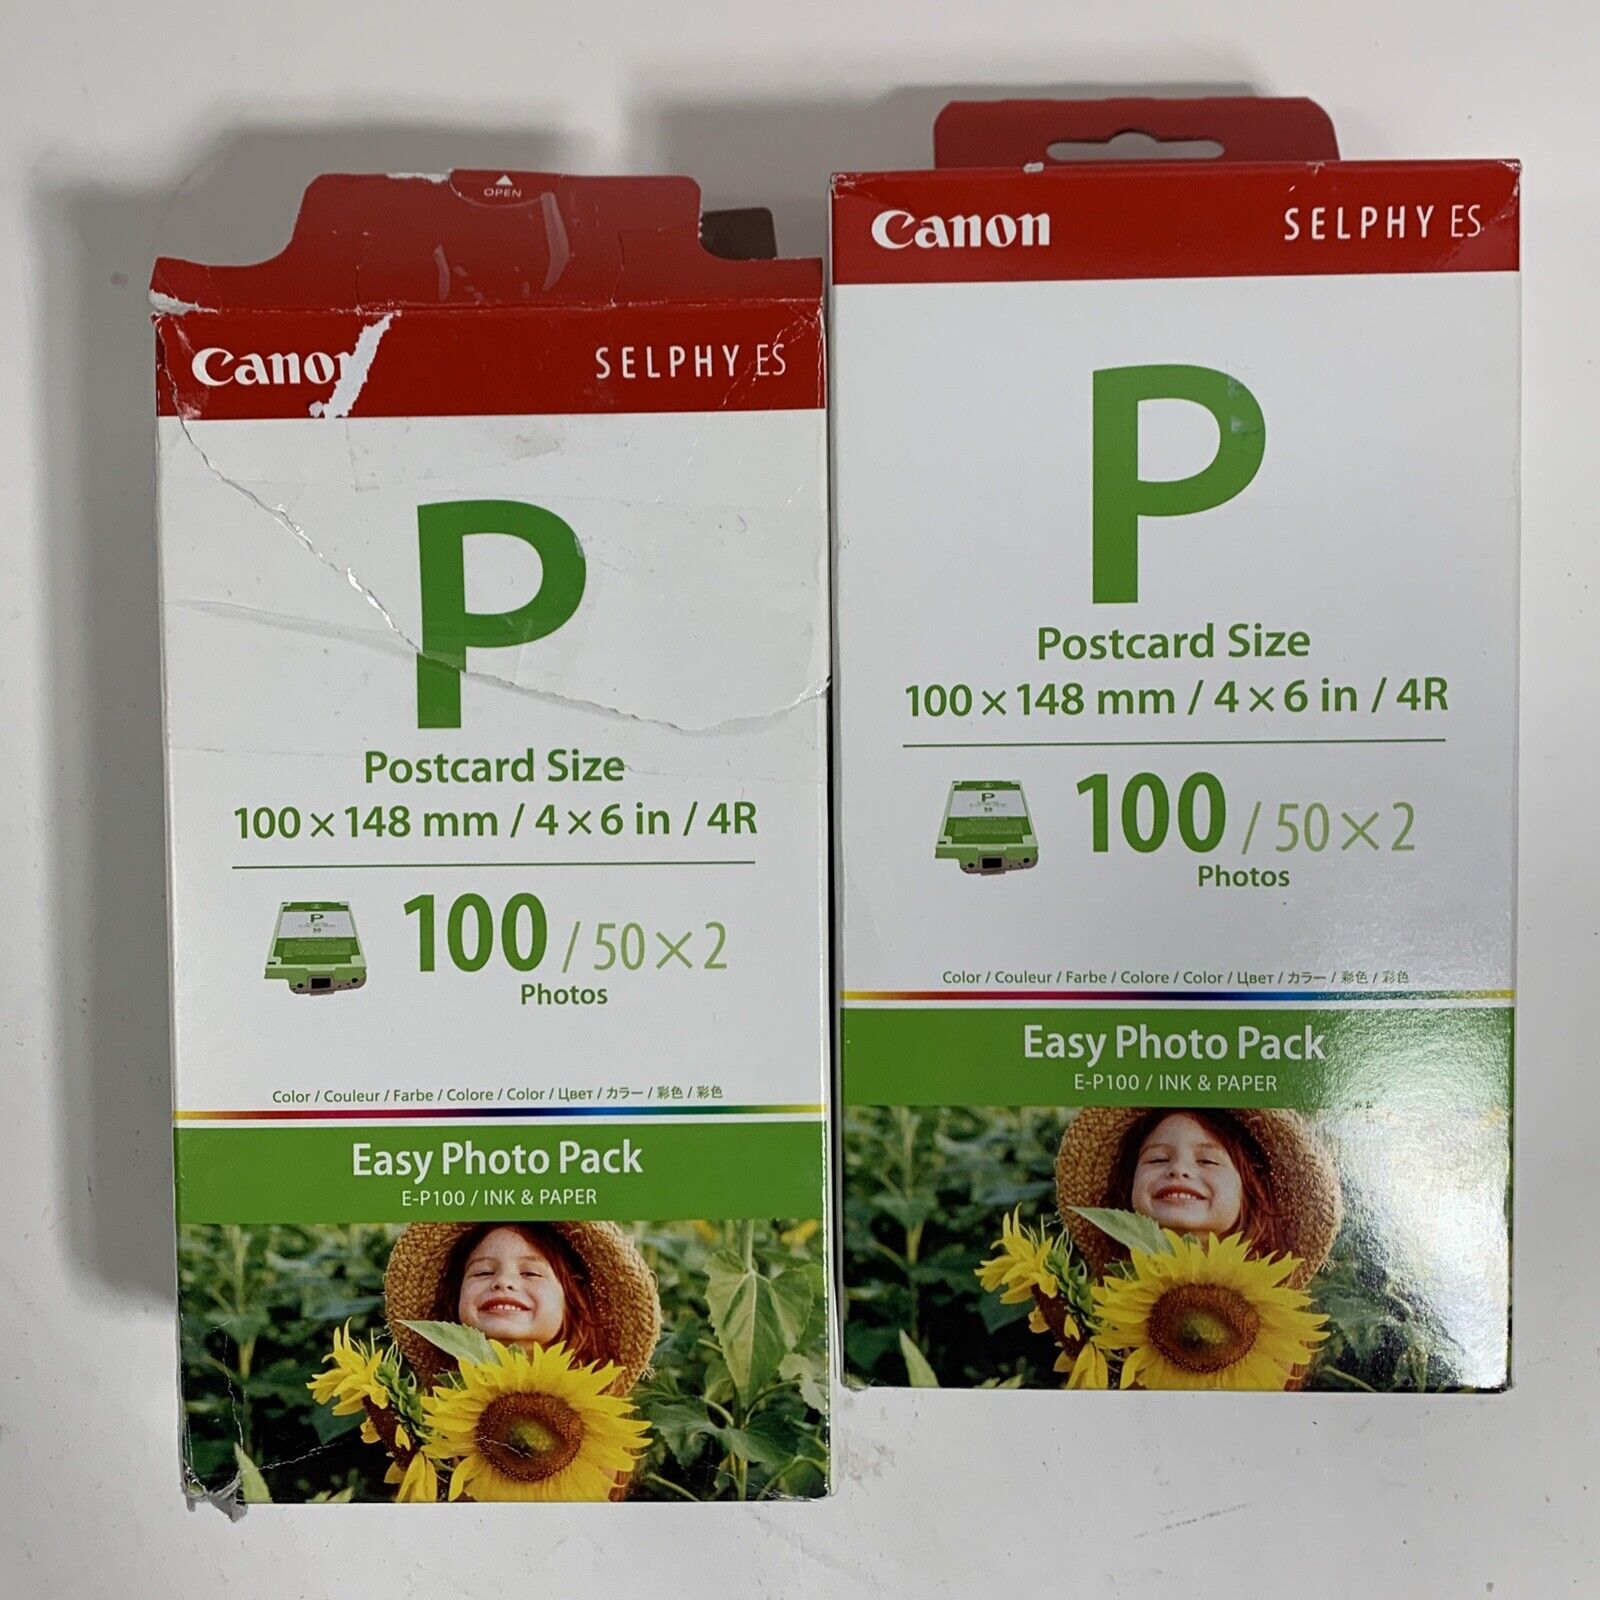 2x Canon Easy Photo Pack E-P100 Ink & Paper SELPHY Postcard Size 4” x 6” NOS 200